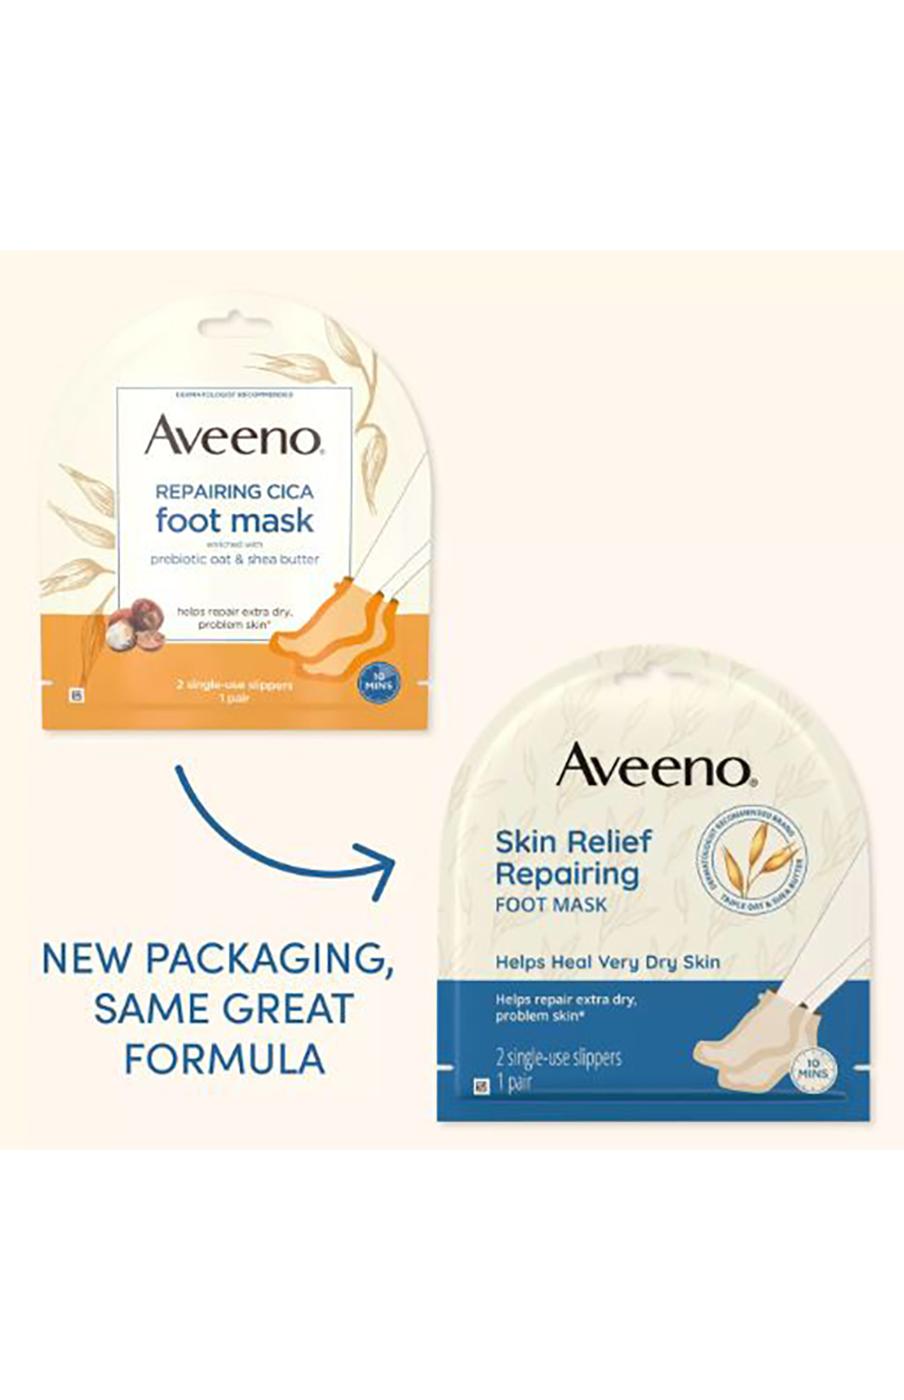 Aveeno Skin Relief Repairing Foot Mask 2 Single-Use Slippers; image 2 of 3